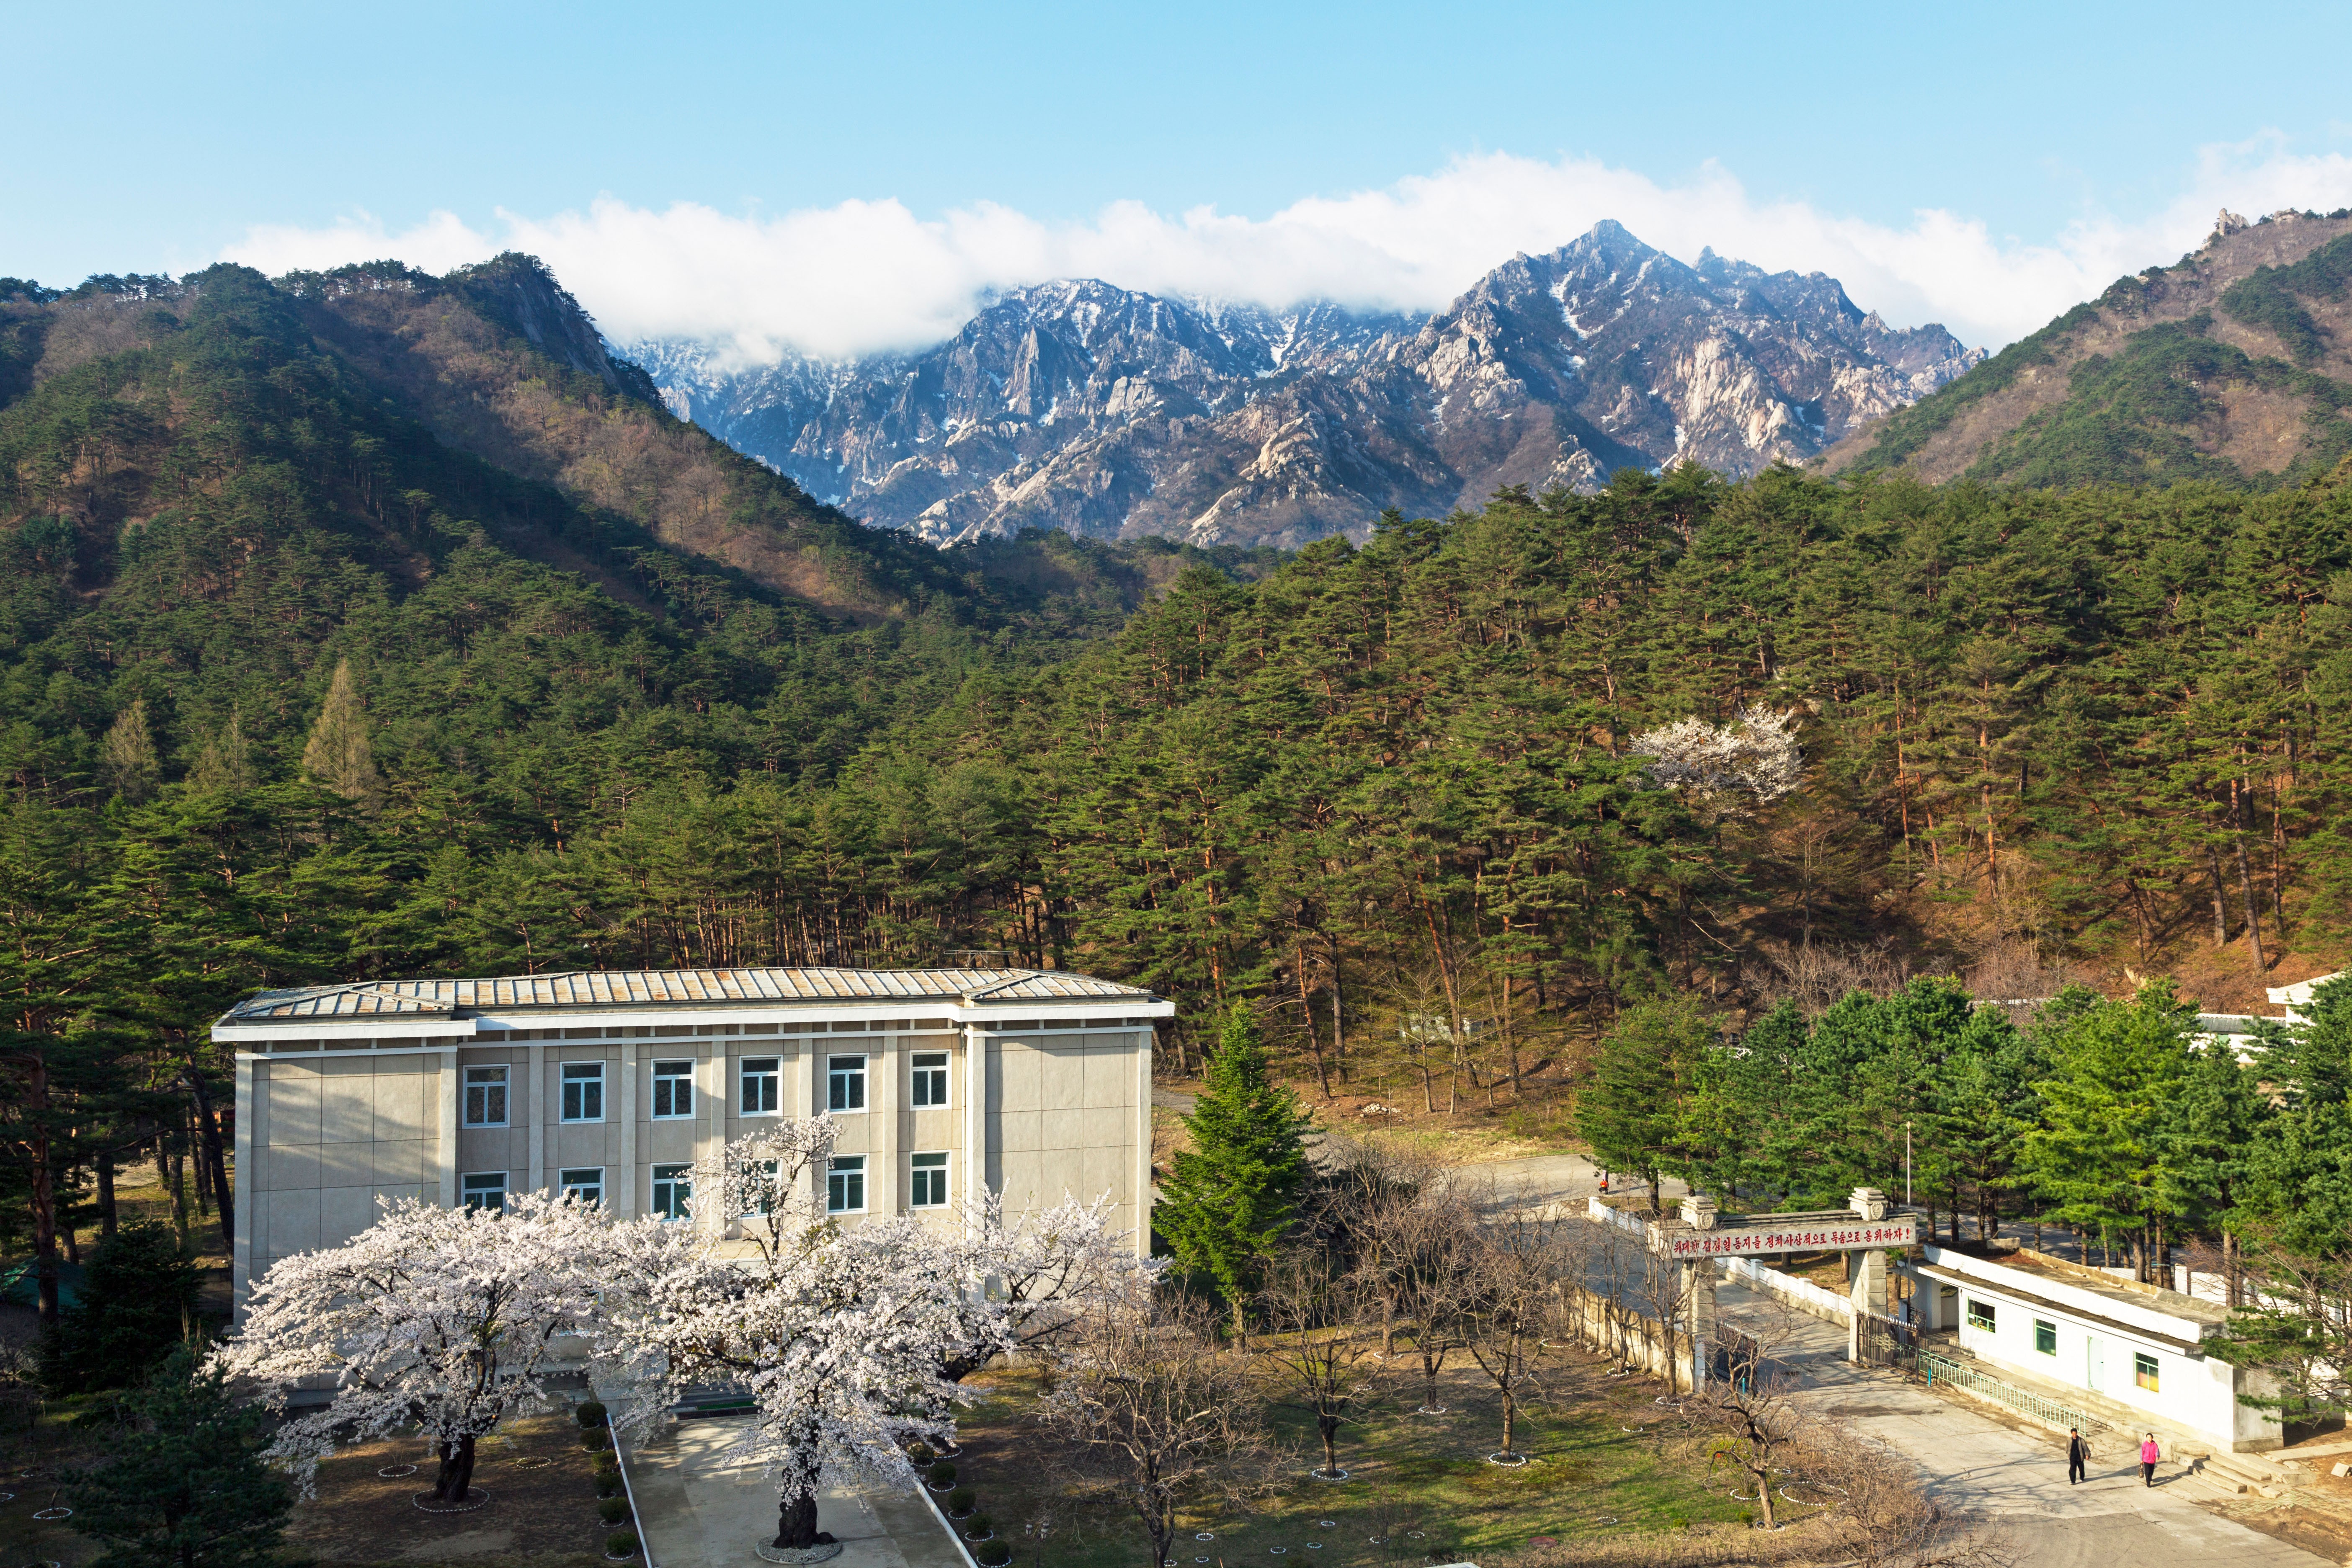 The South Korean developed resort complex in the Kumgang Mountains of North Korea, Photo: Alamy